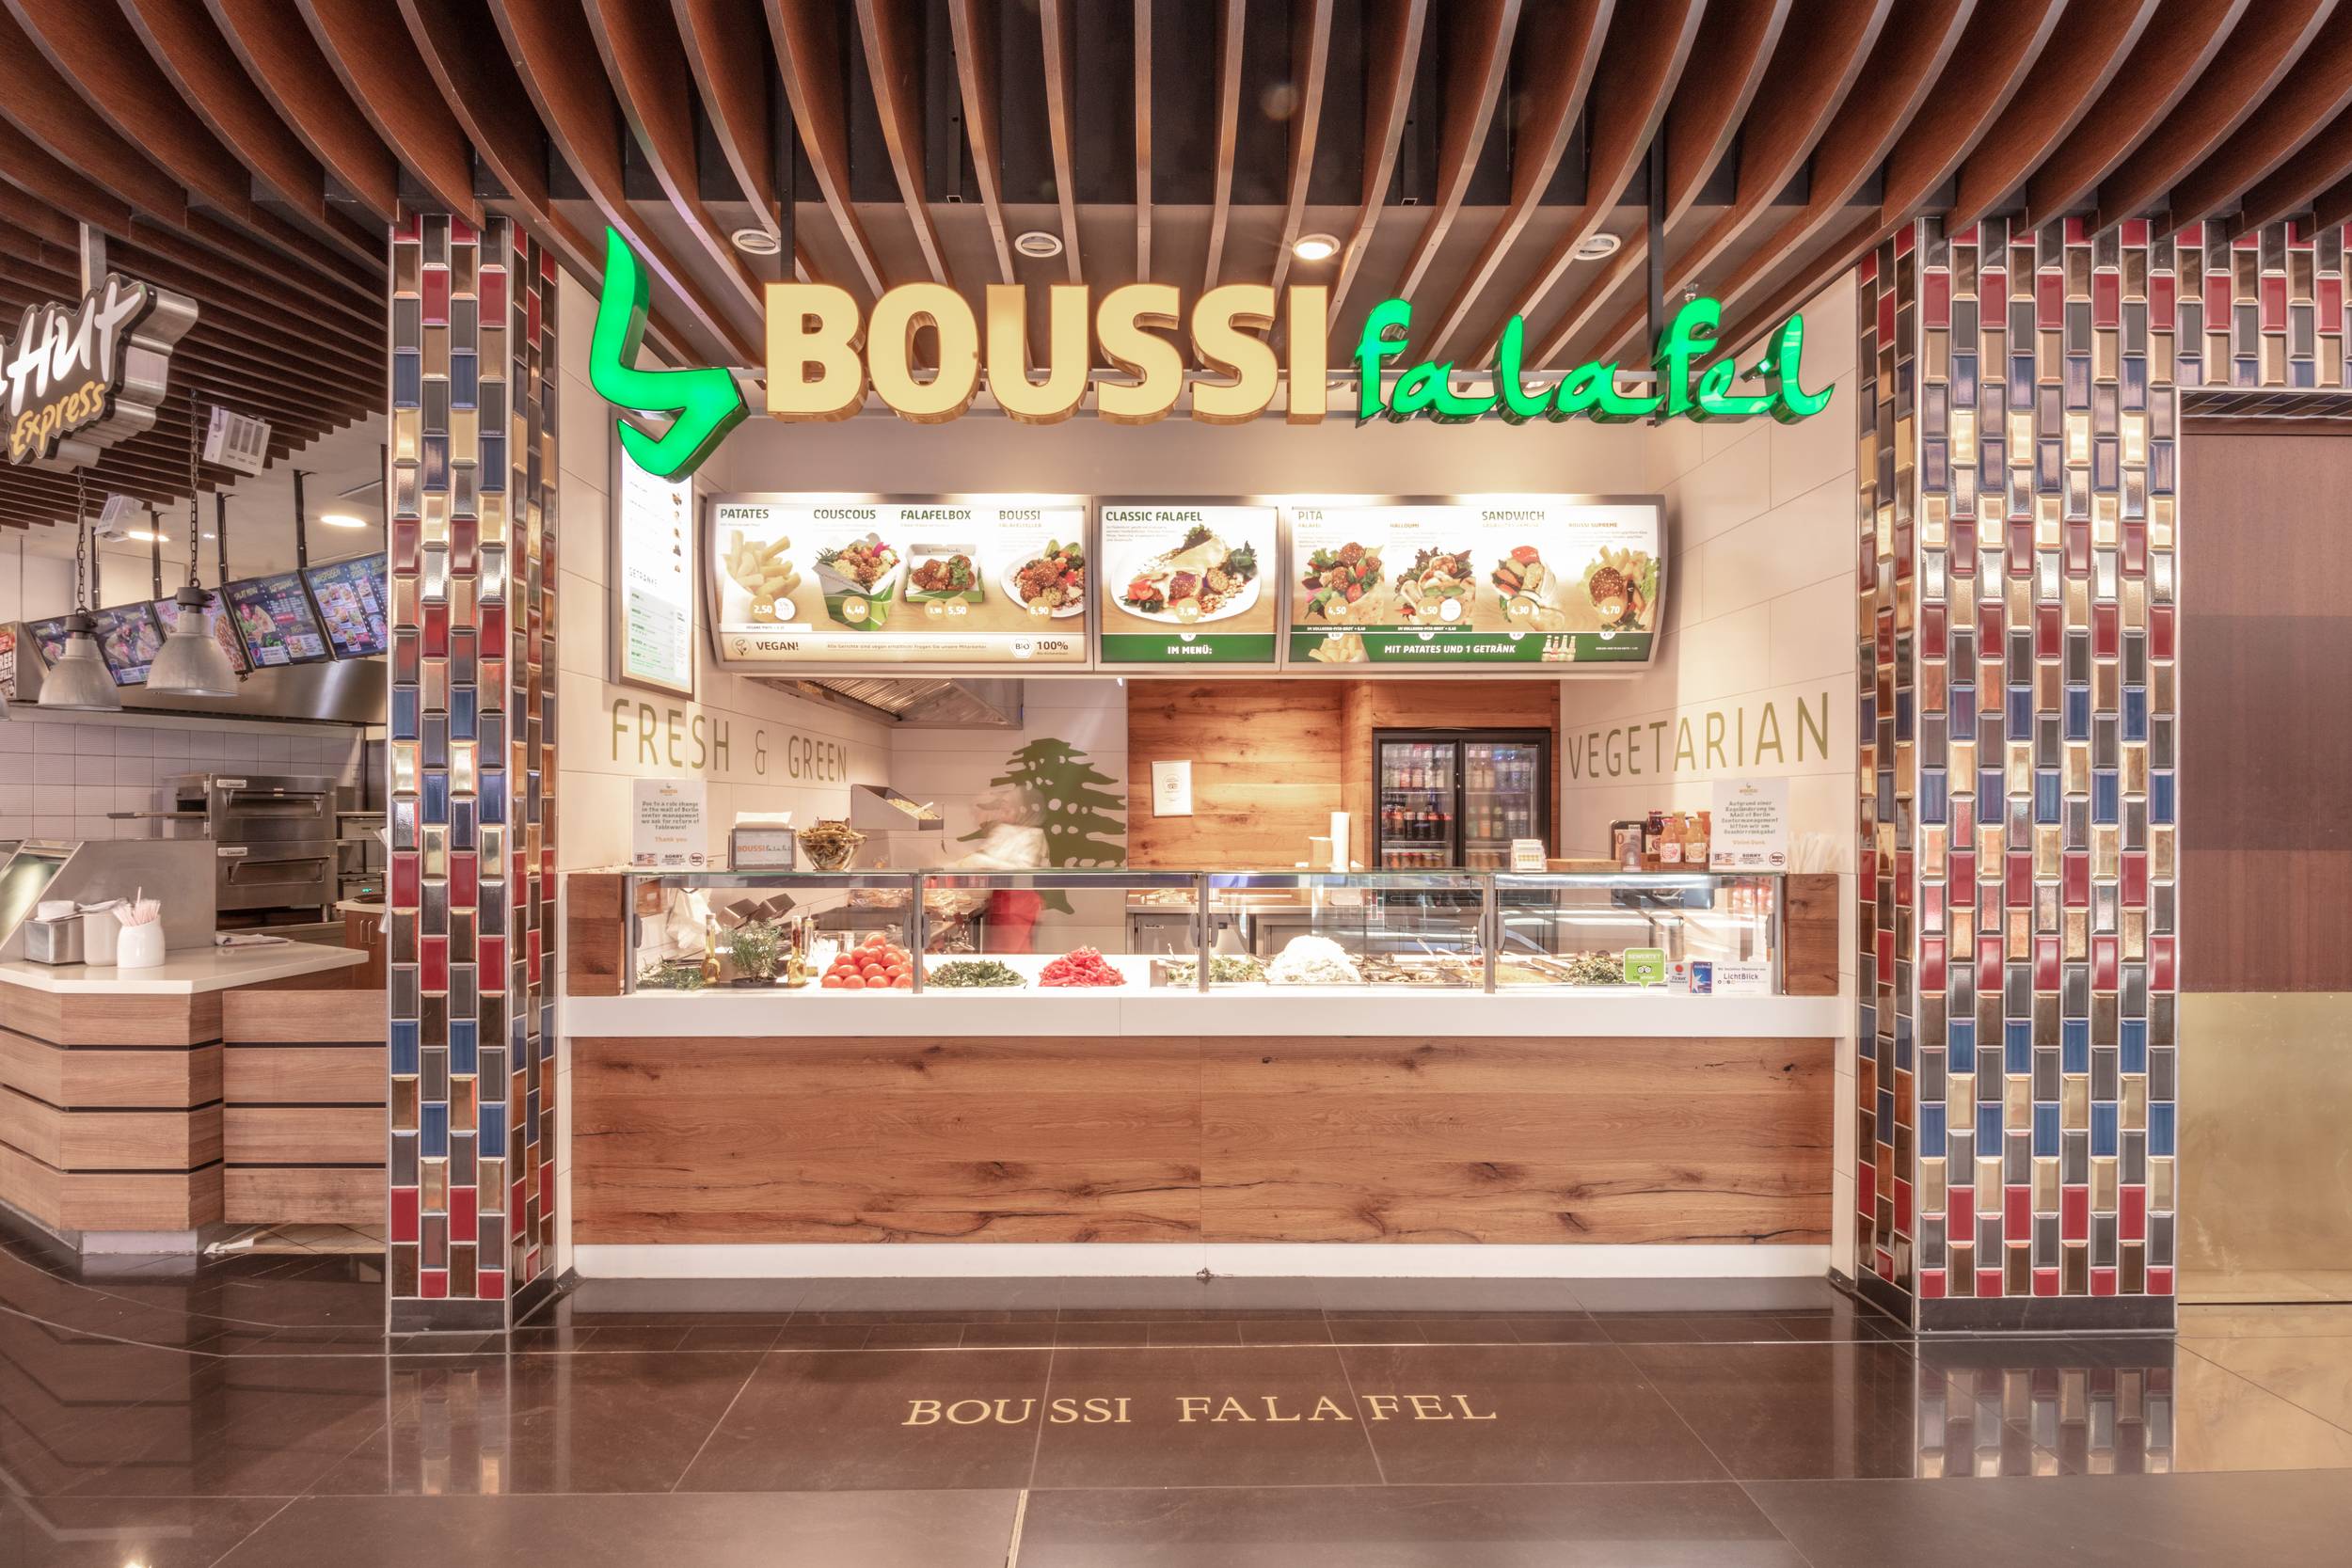 Boussi Falafel at the Mall of Berlin